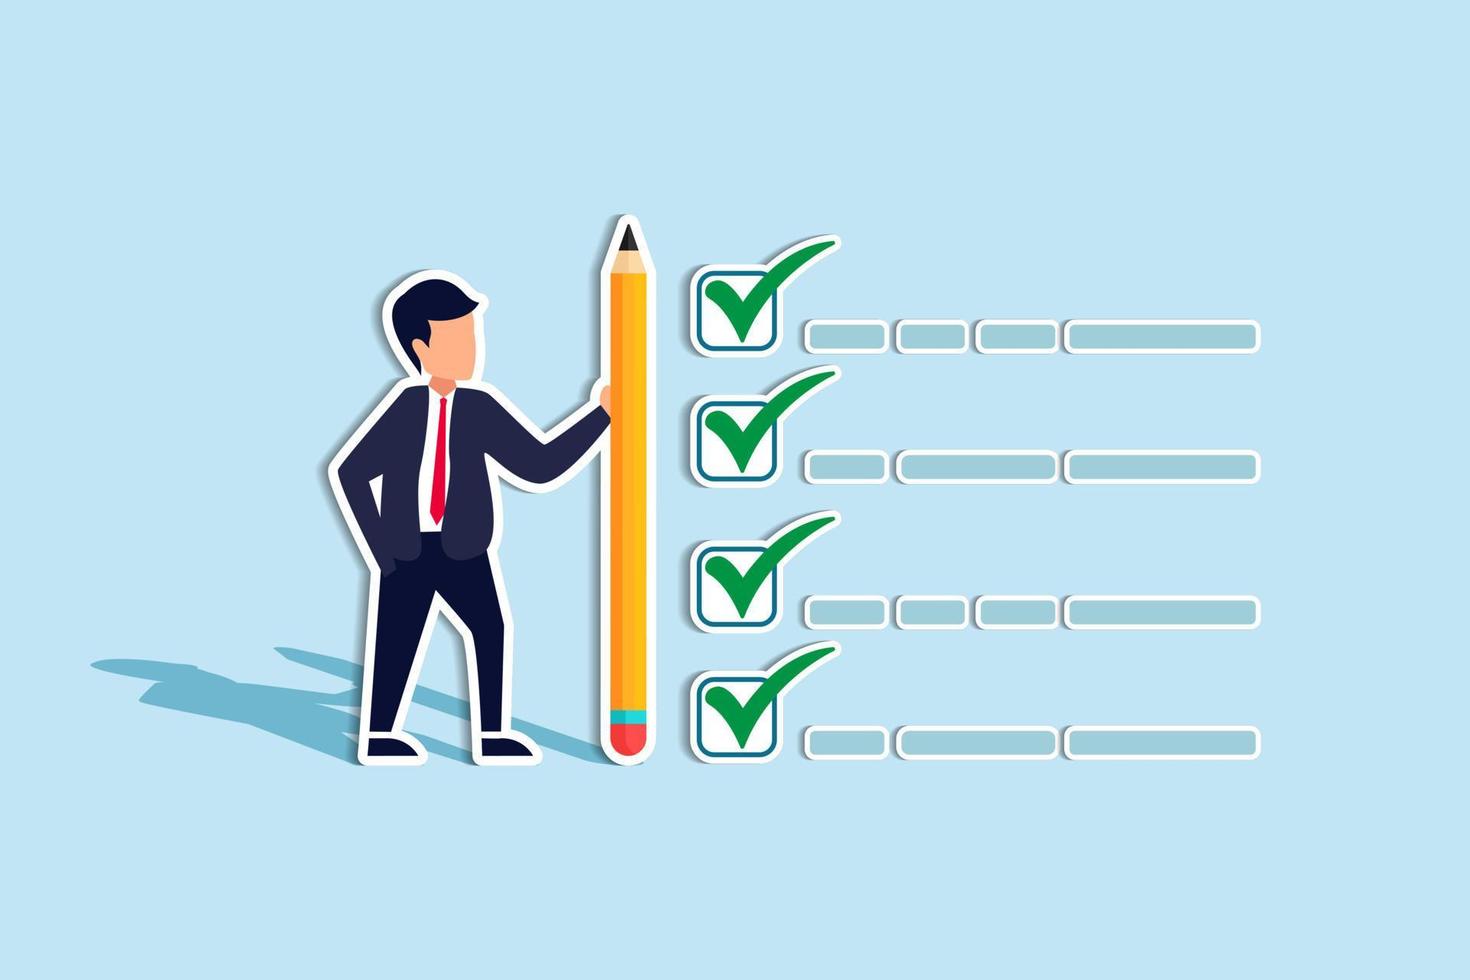 Getting things done, completed tasks or business accomplishment, finished checklist, achievement or project progression concept, businessman expert holding pencil tick all completed task checkbox vector